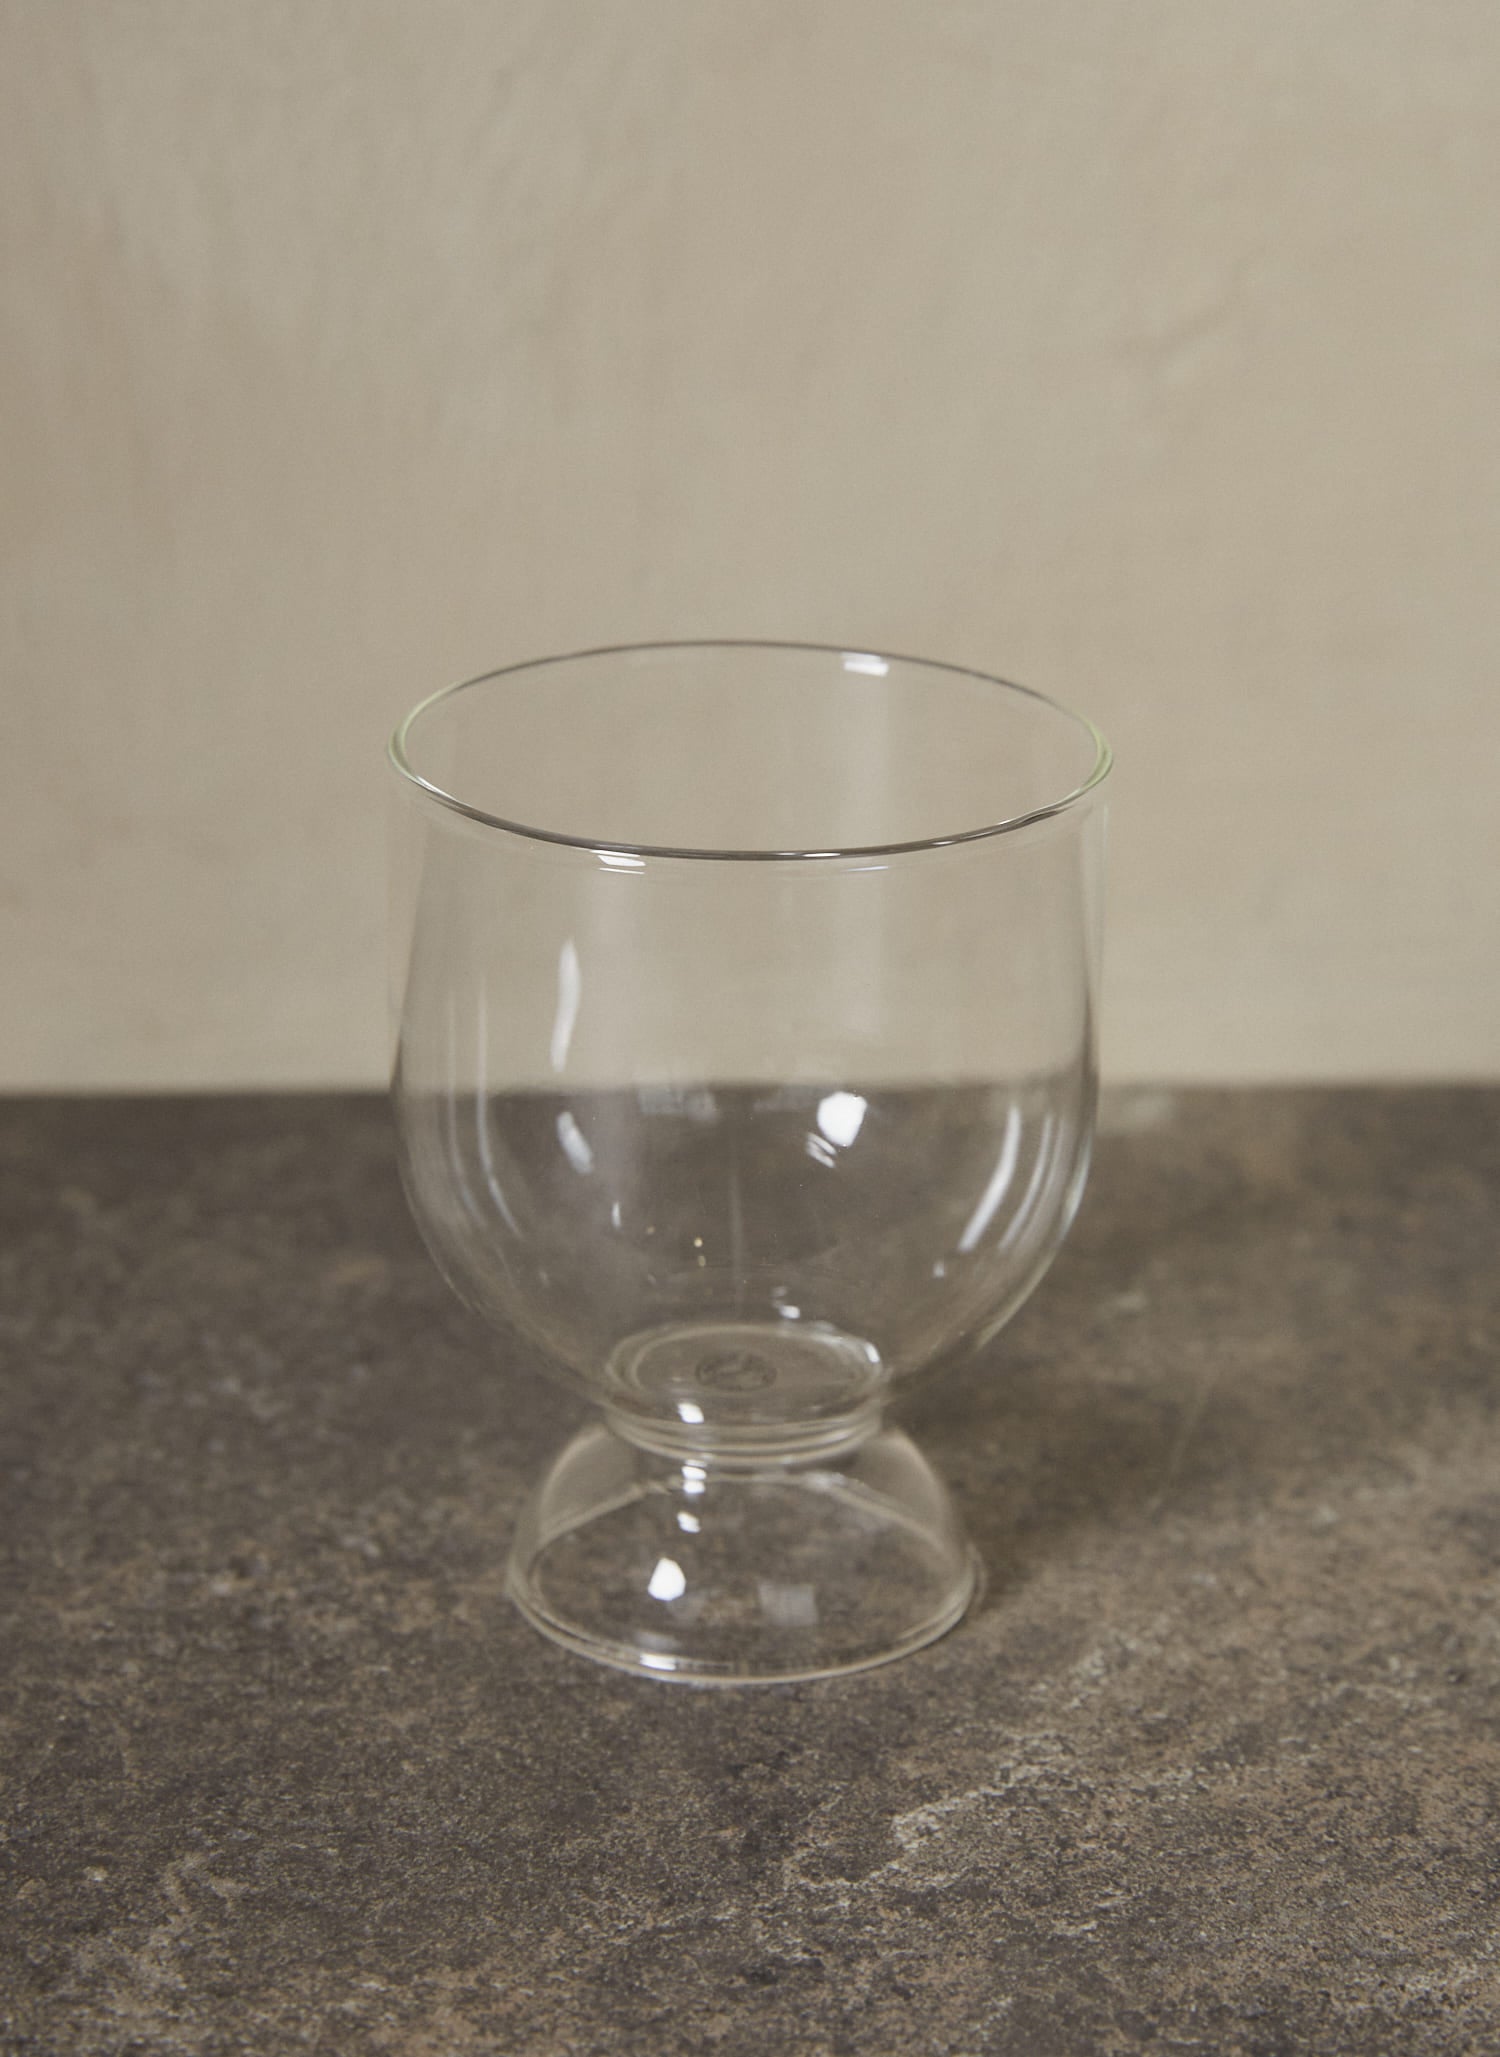 Still Glasses Set of 2. Rooted in simplicity and balance, this pair of gently rounded mouth-blown glasses feature an hourglass shape, making them ideal for wine as well as water.